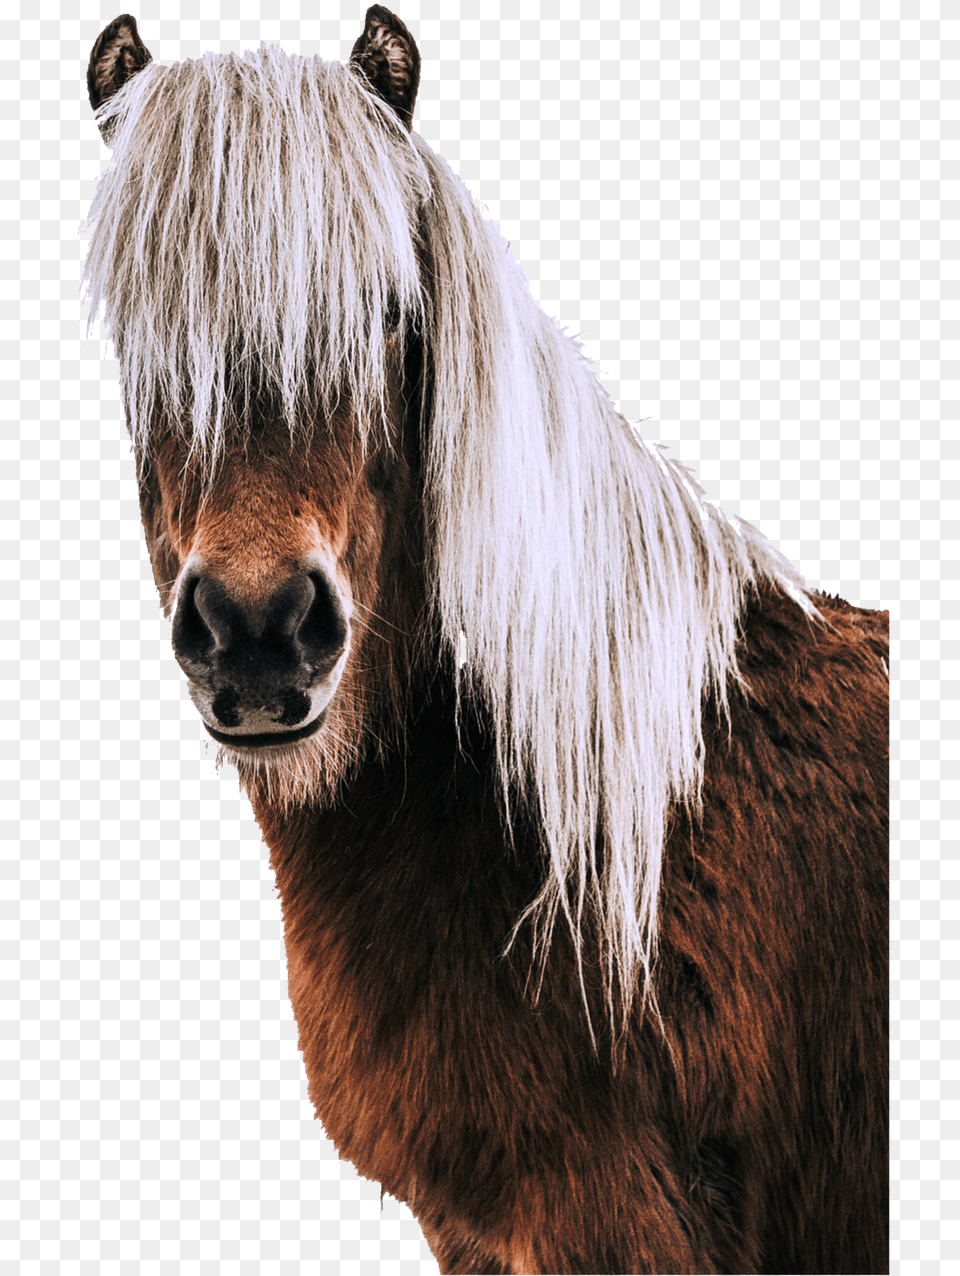 Isolated Horse Animal Picture Real Horse Head Pictures On Transparent Background, Mammal, Stallion, Colt Horse Png